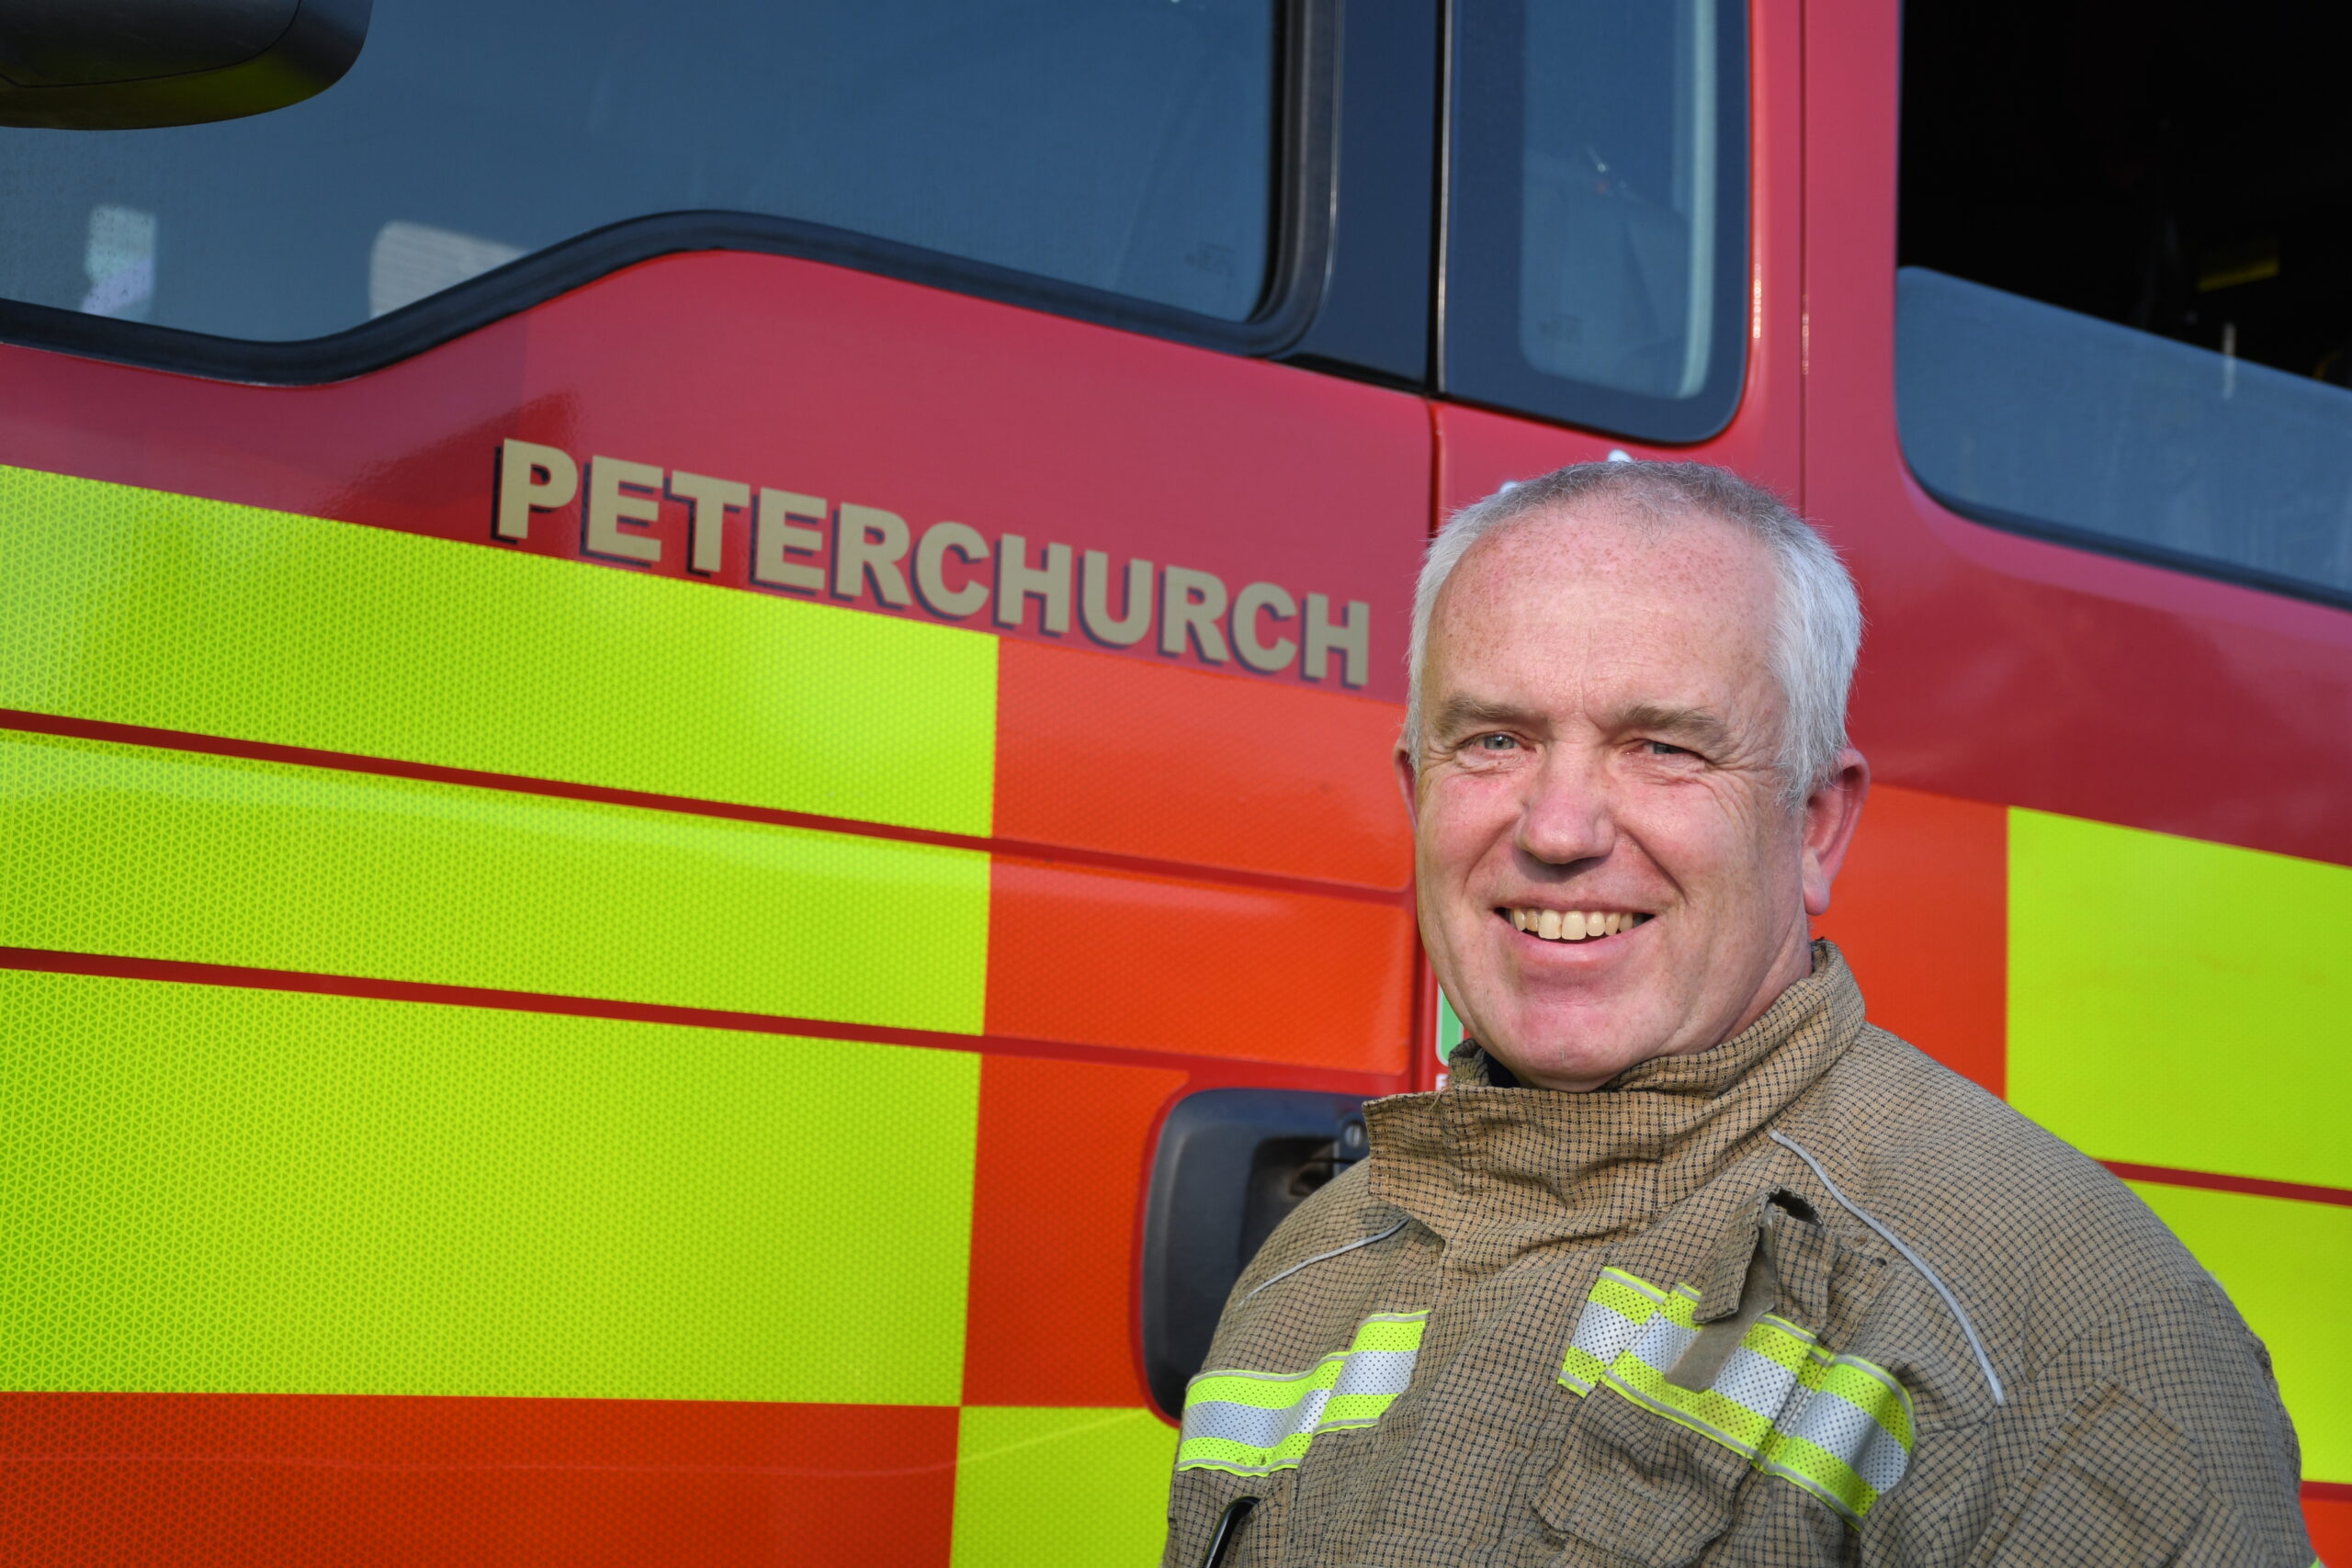 Firefighter in uniform in front of fire engine